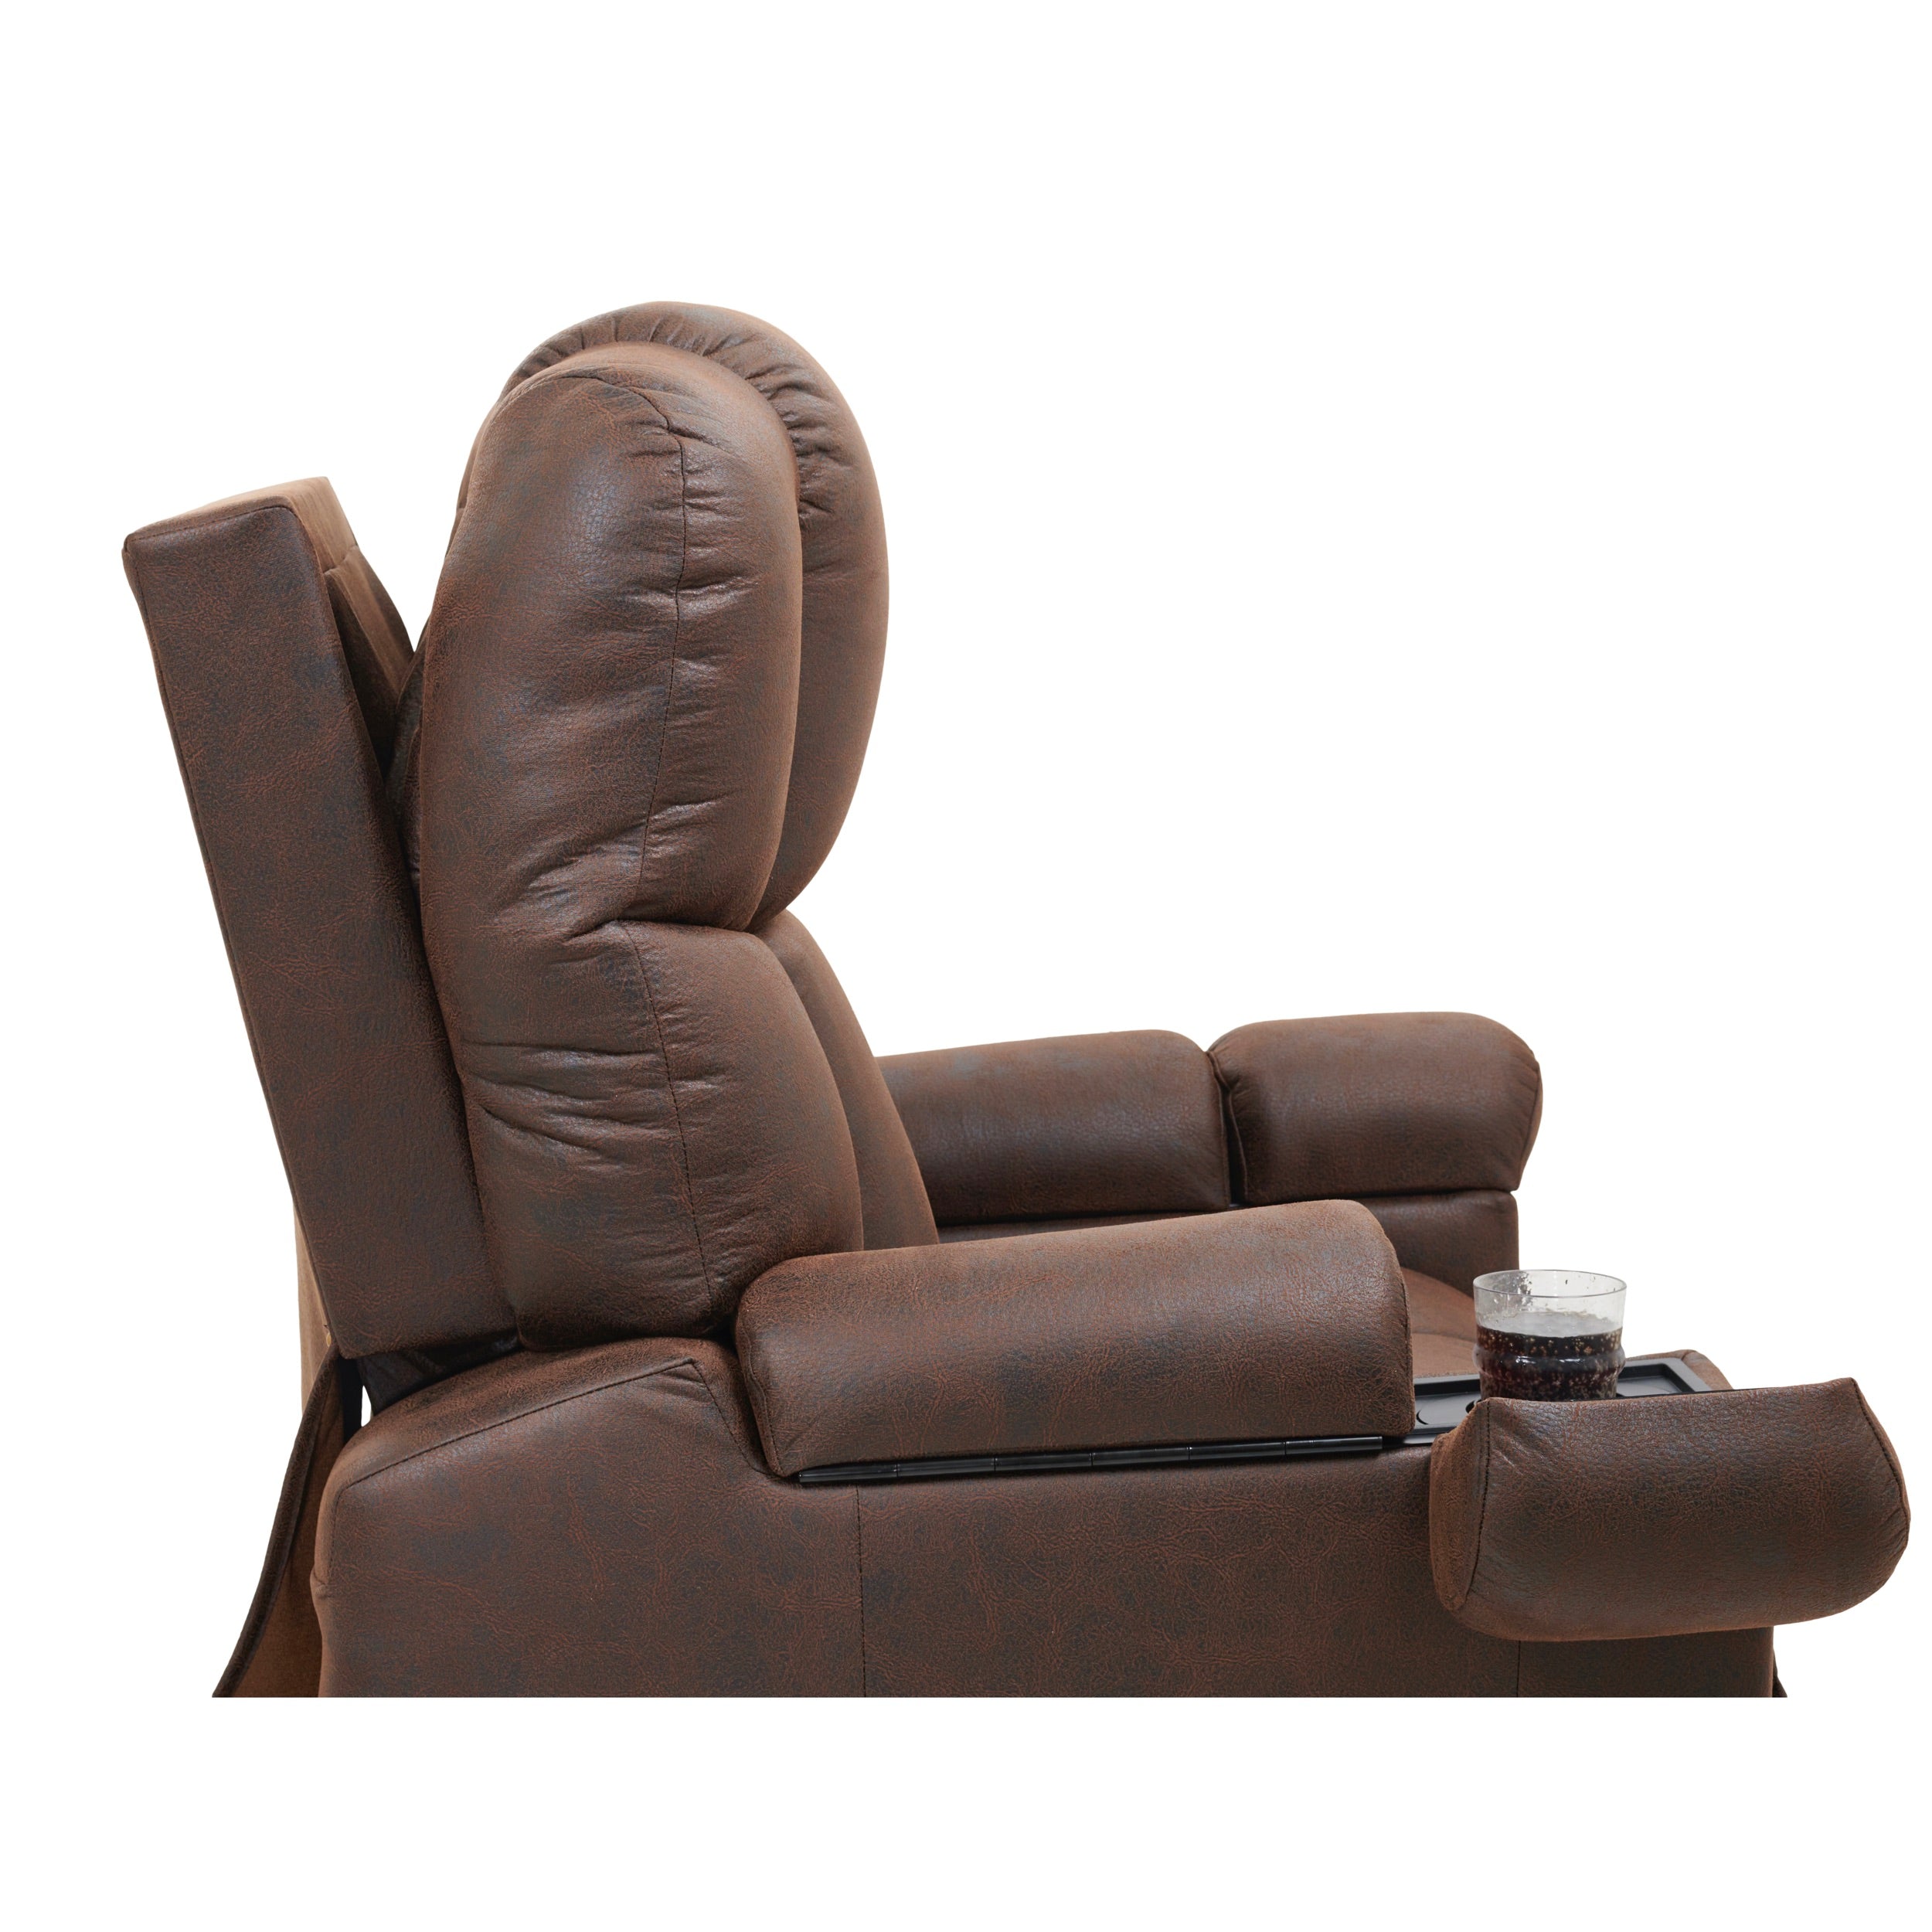 Sideview of the Rigel Lift Chair Power Recliner